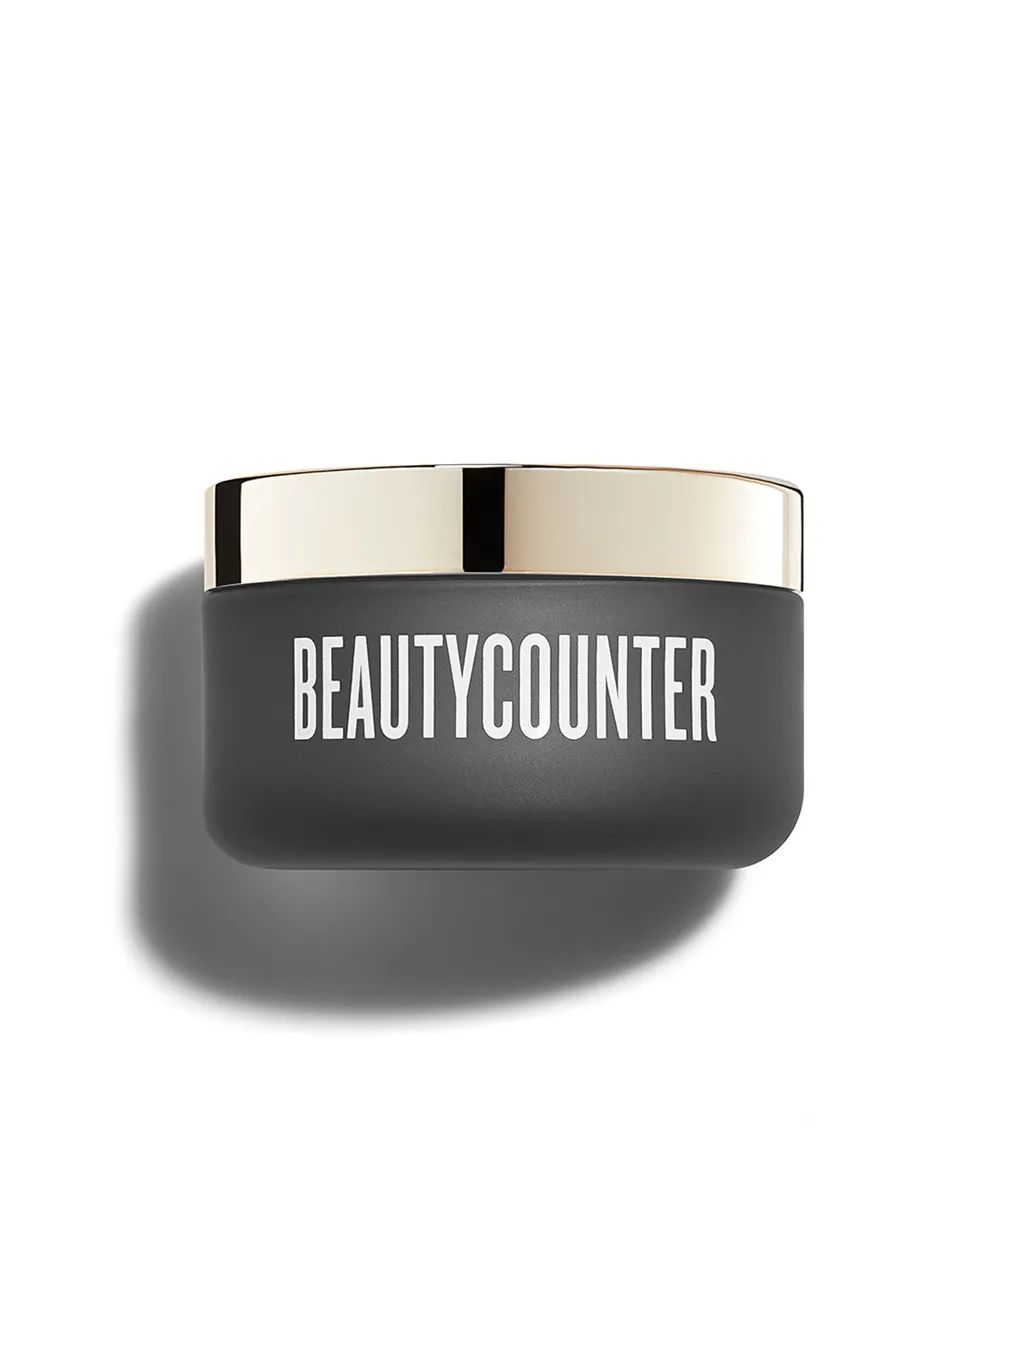 Counter+ Lotus Glow Cleansing Balm - Beautycounter - Skin Care, Makeup, Bath and Body and more! | Beautycounter.com